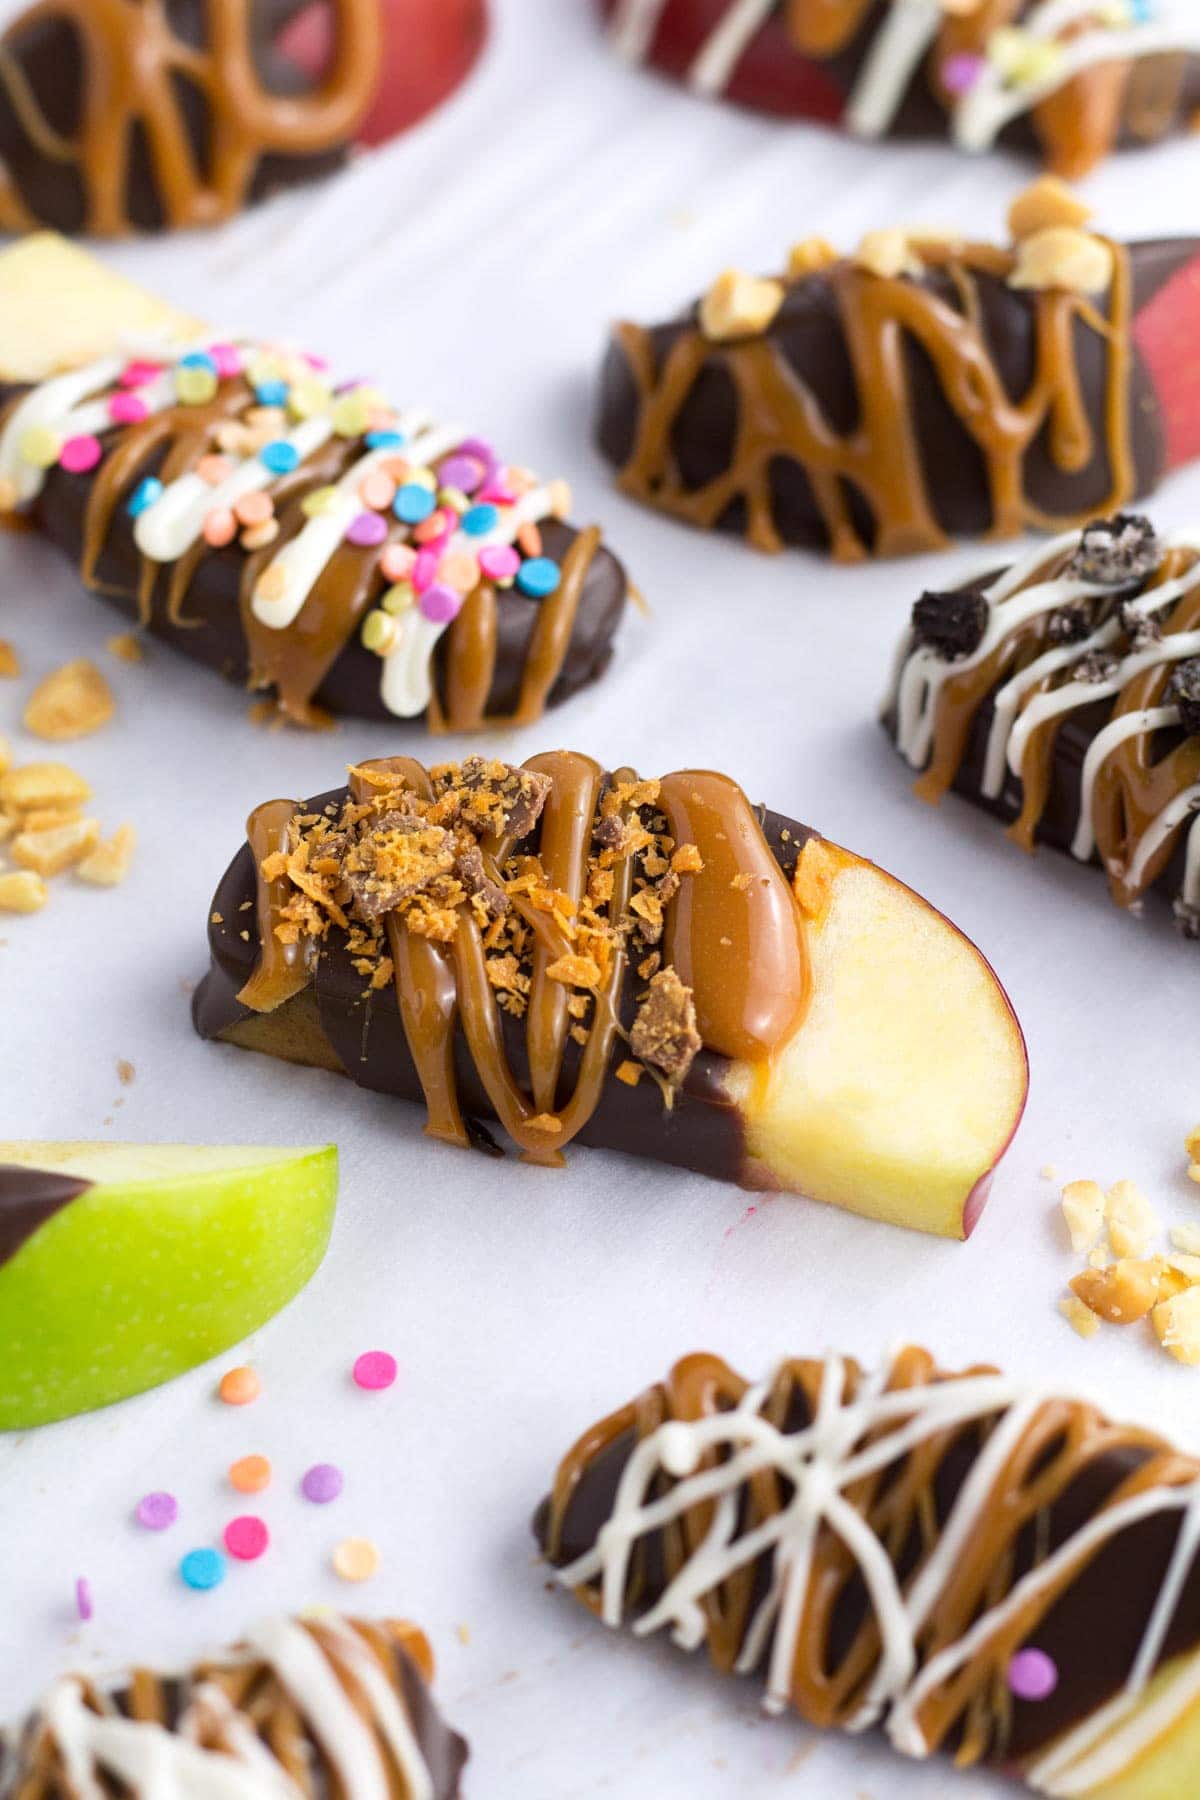 Apples coated with chocolate and caramel; syrup